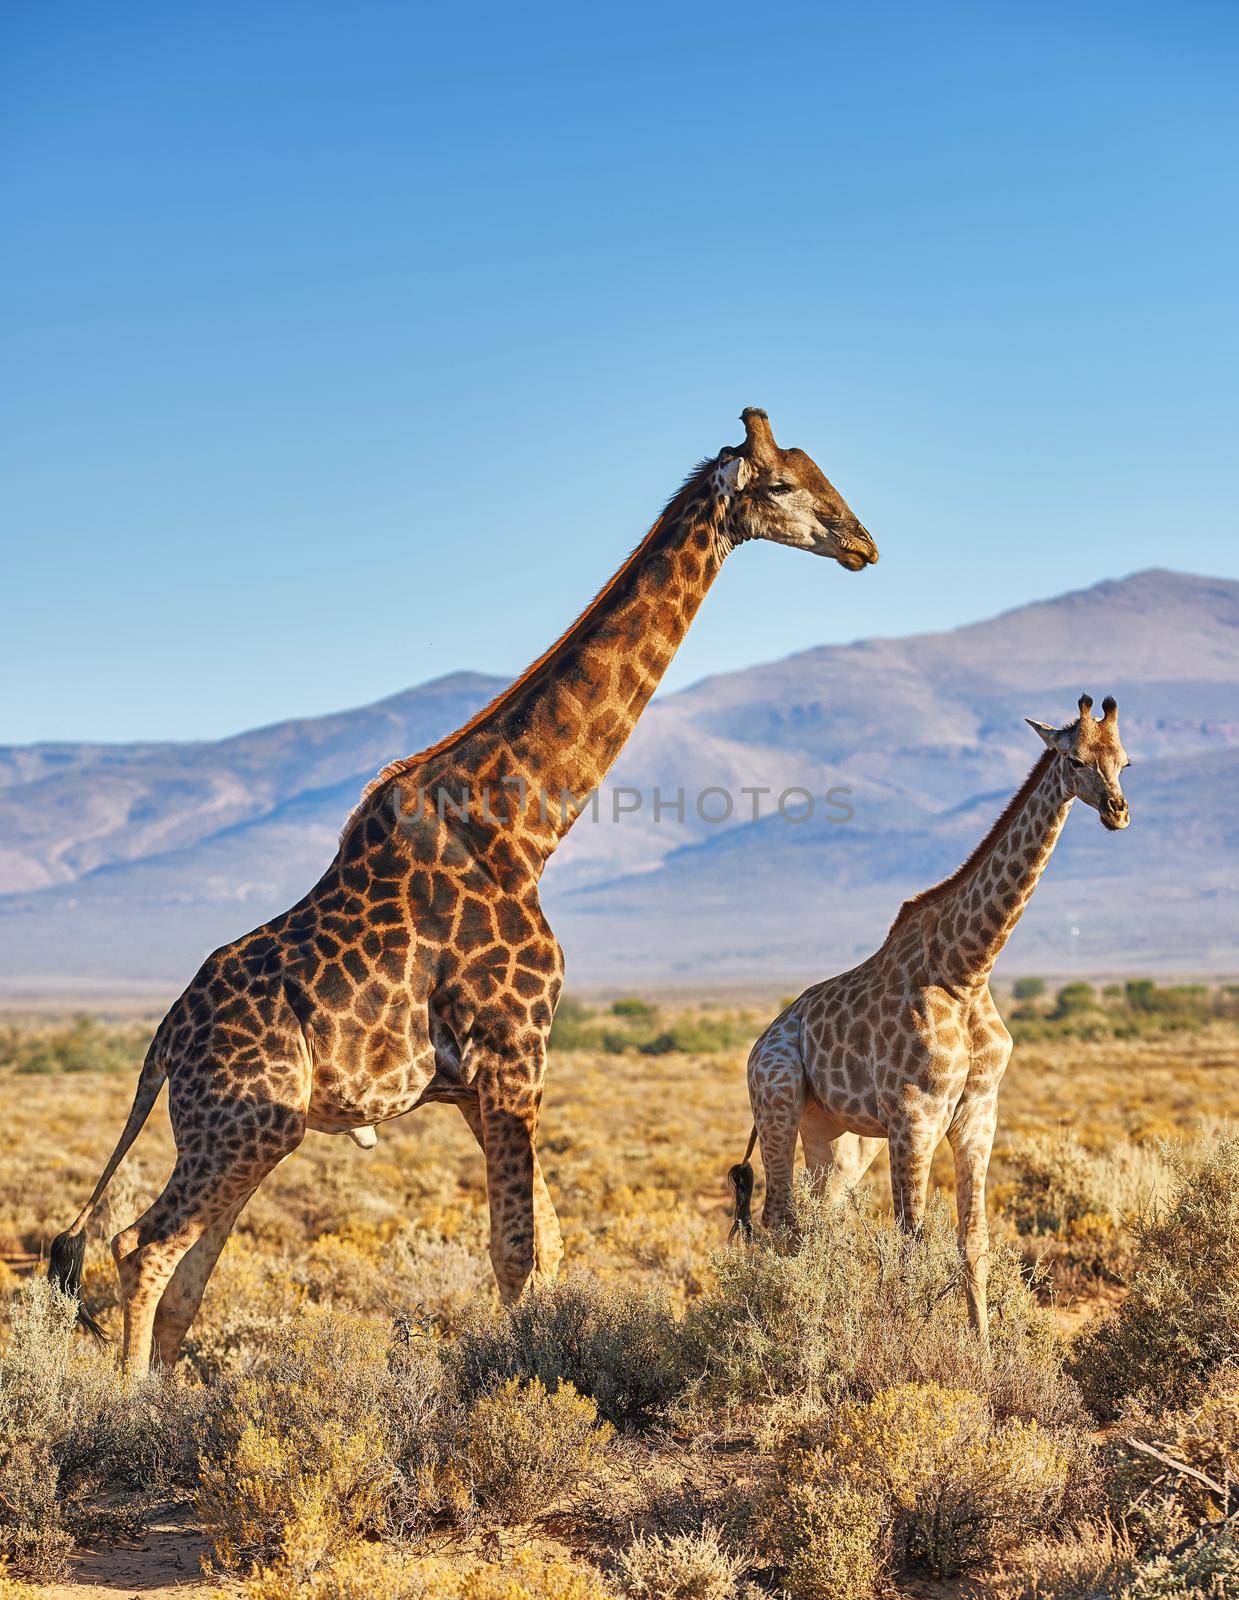 Giraffes in Savanna in safari on hot, sunny summer day. Wilderness of nature full of light brown bushes, grass and mountains in background. Wild space in South Africa where animals roam free.